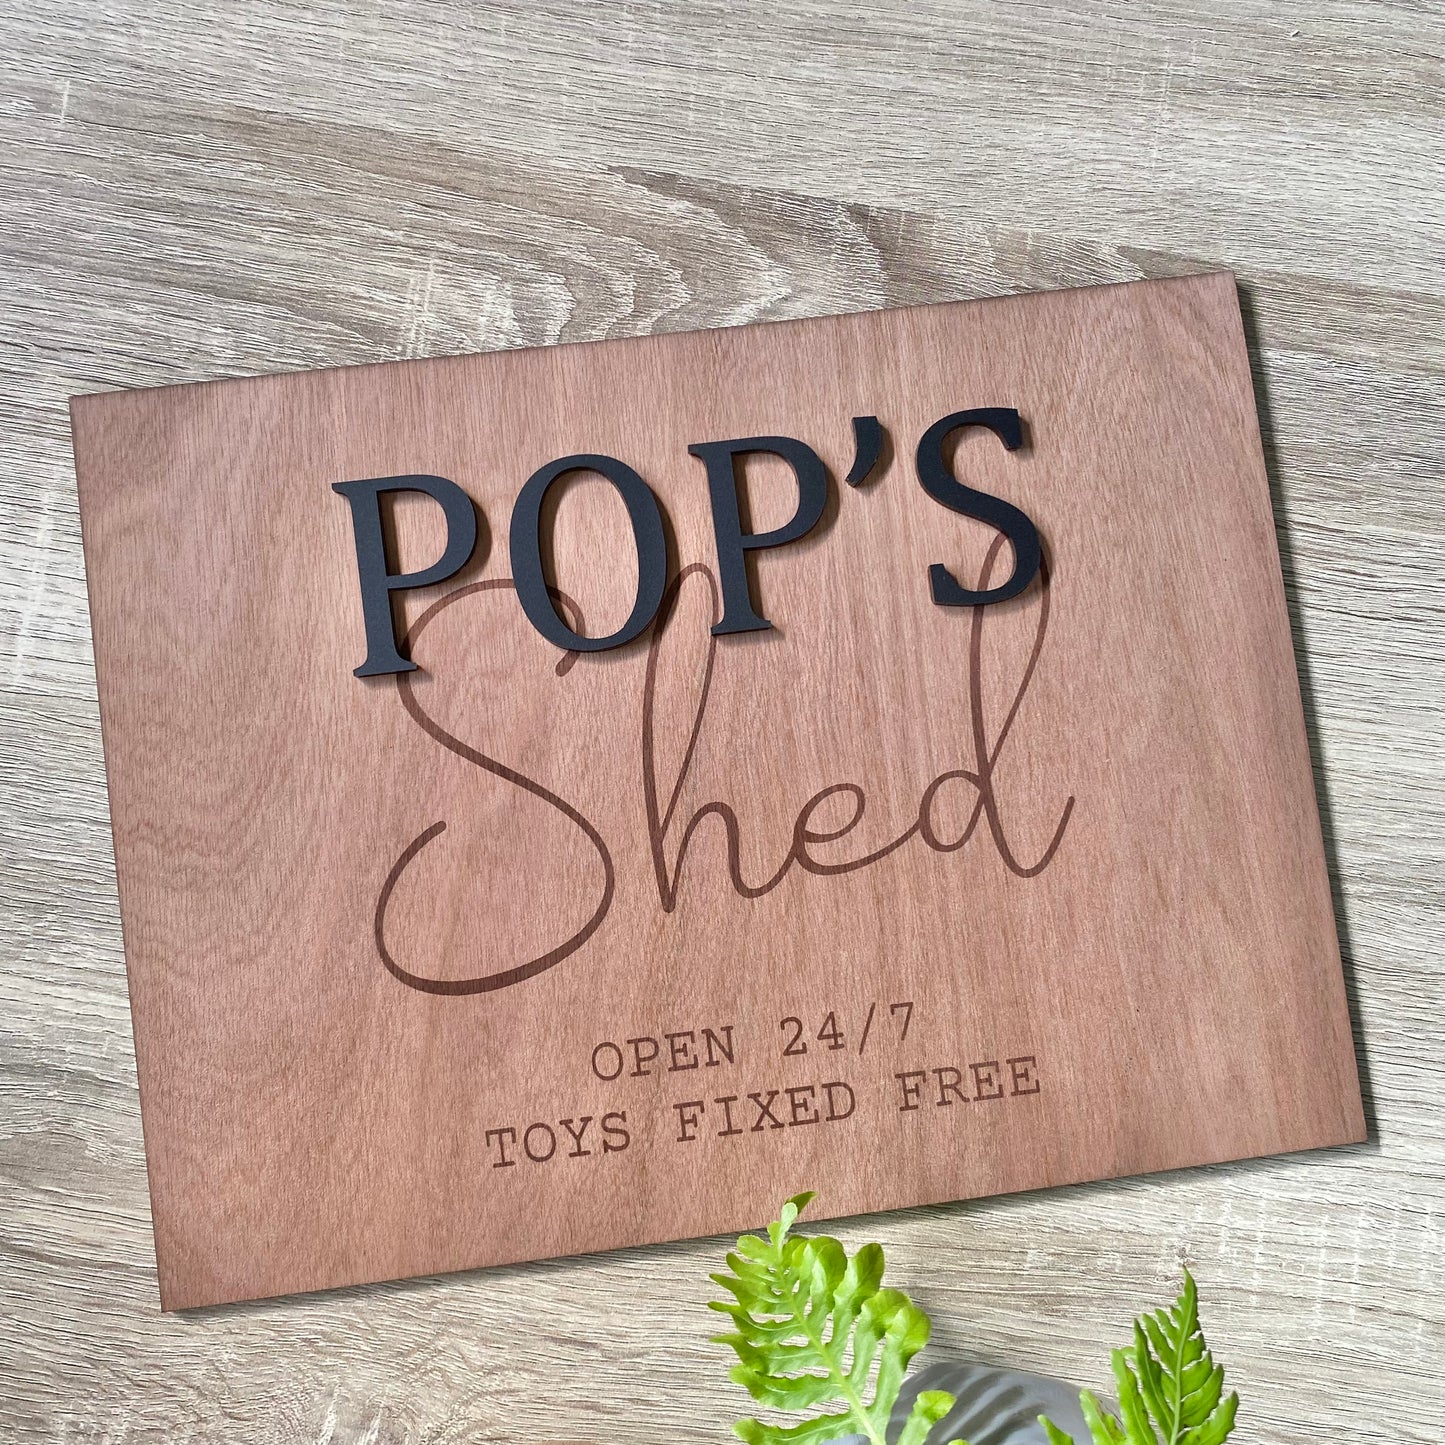 Shed sign, toys fixed free